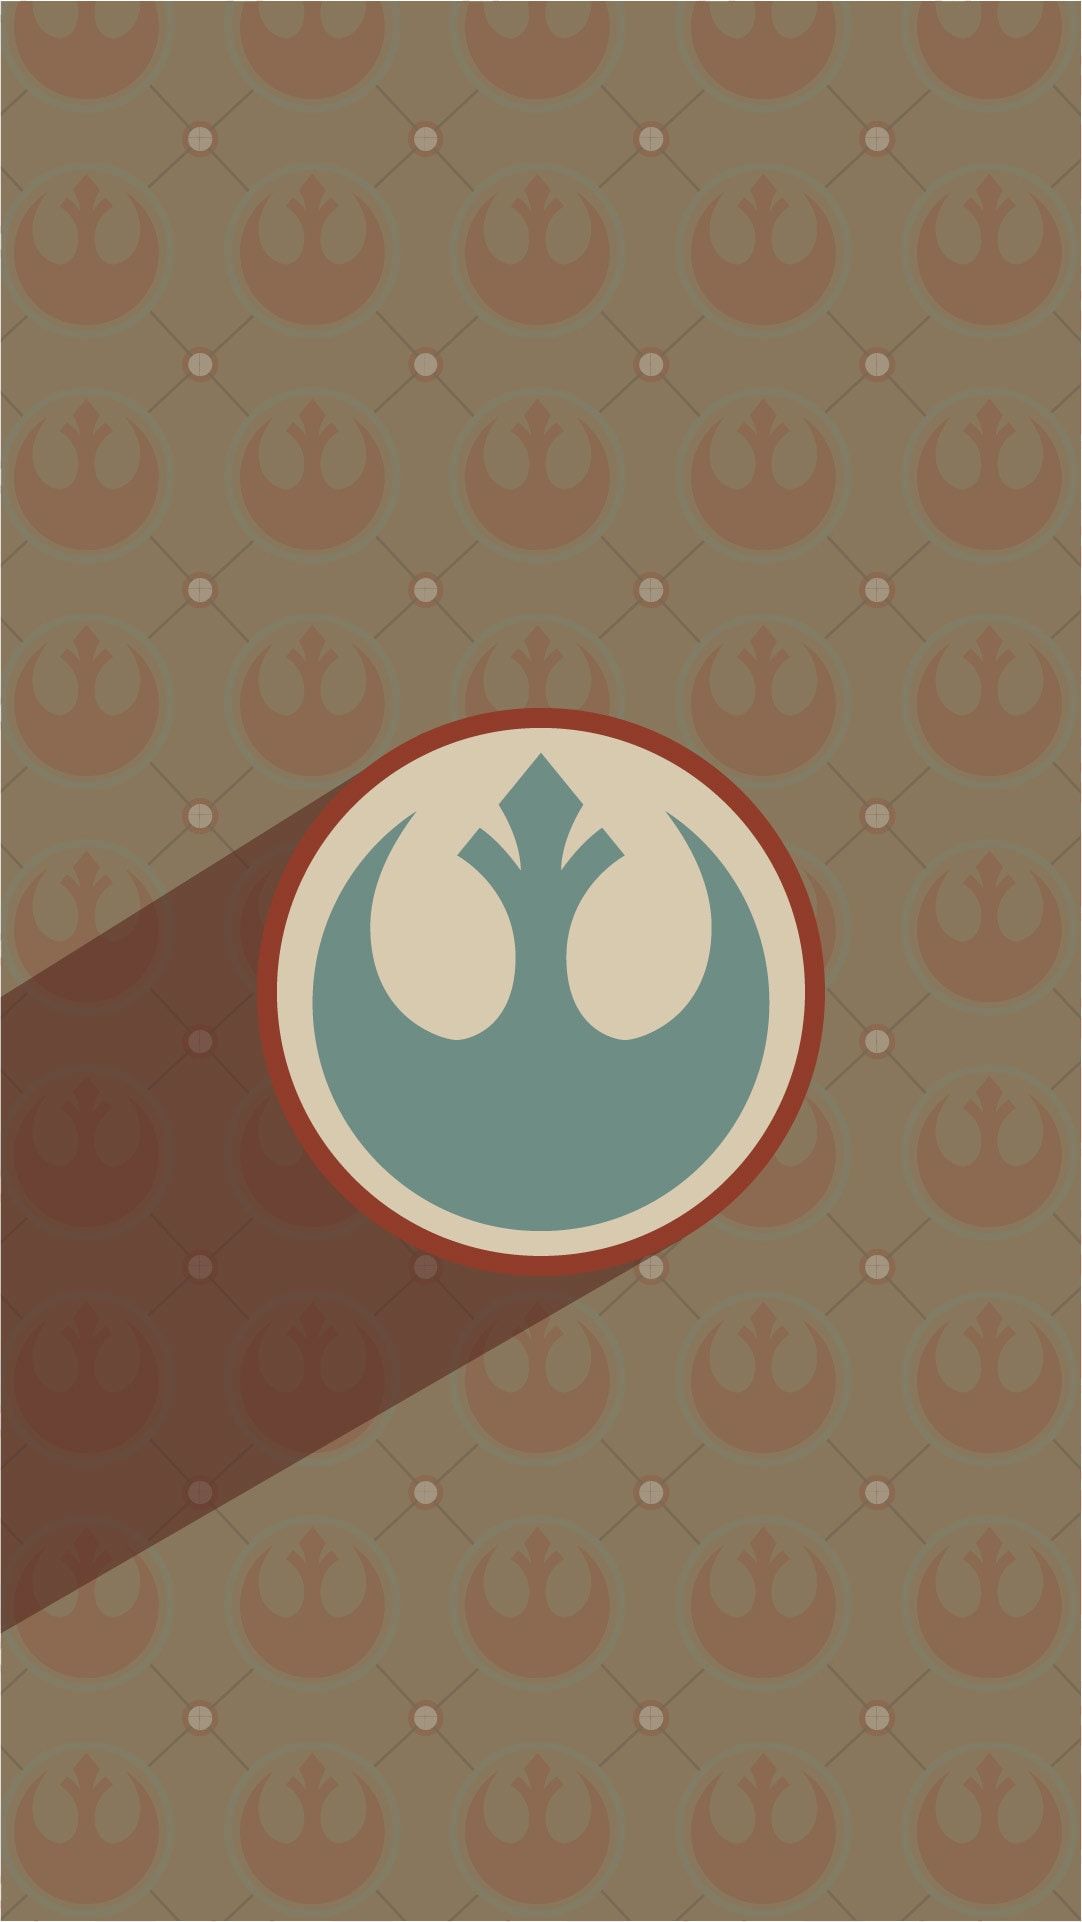 Star Wars Wallpaper for Mobile Devices